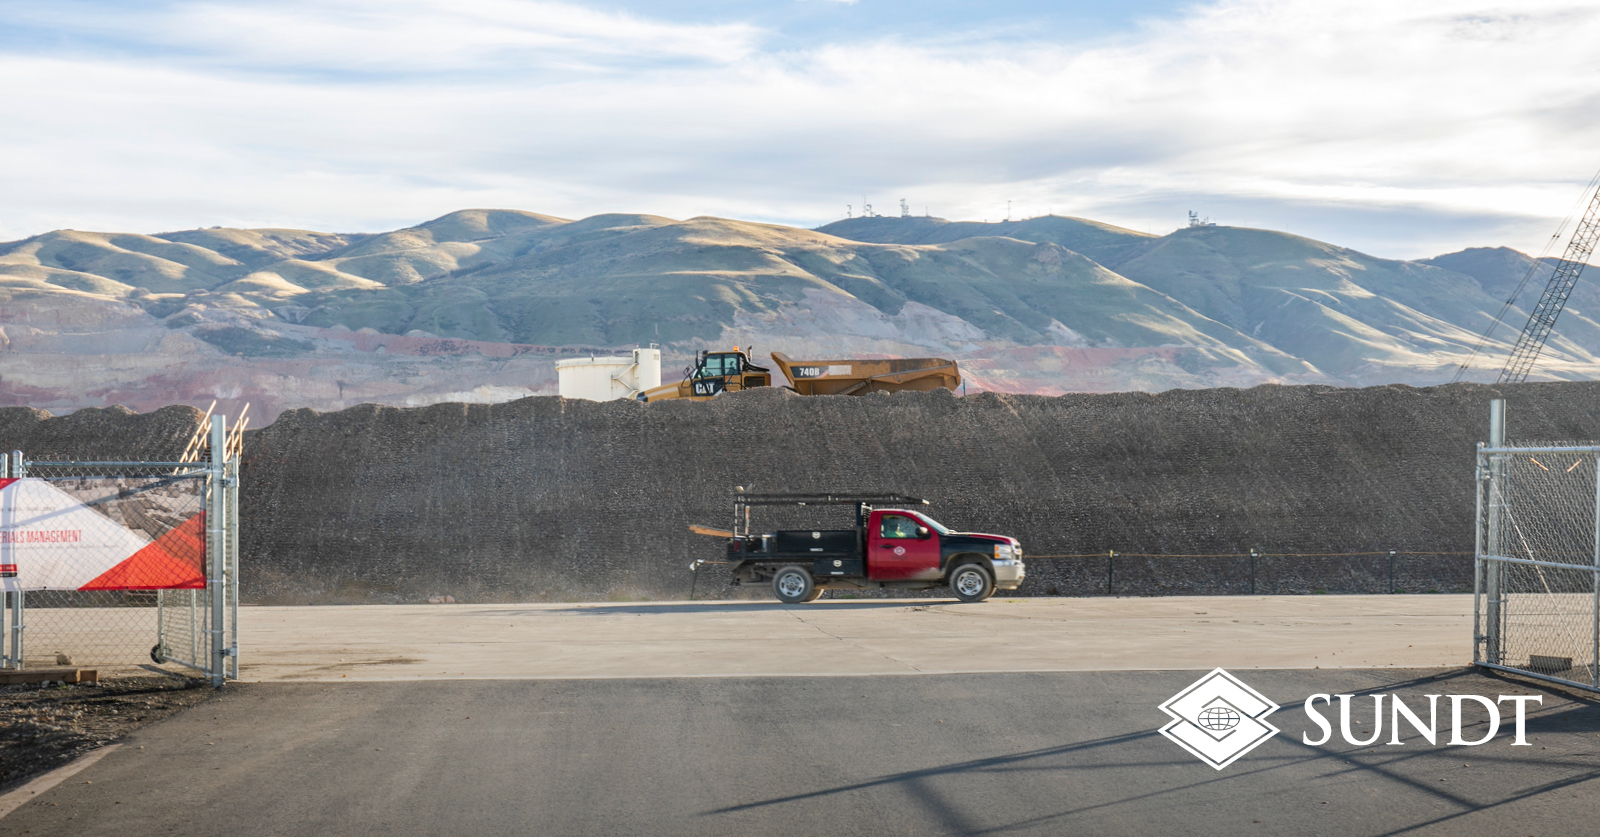 Landscape shot of mountains and a Sundt truck at a job site.